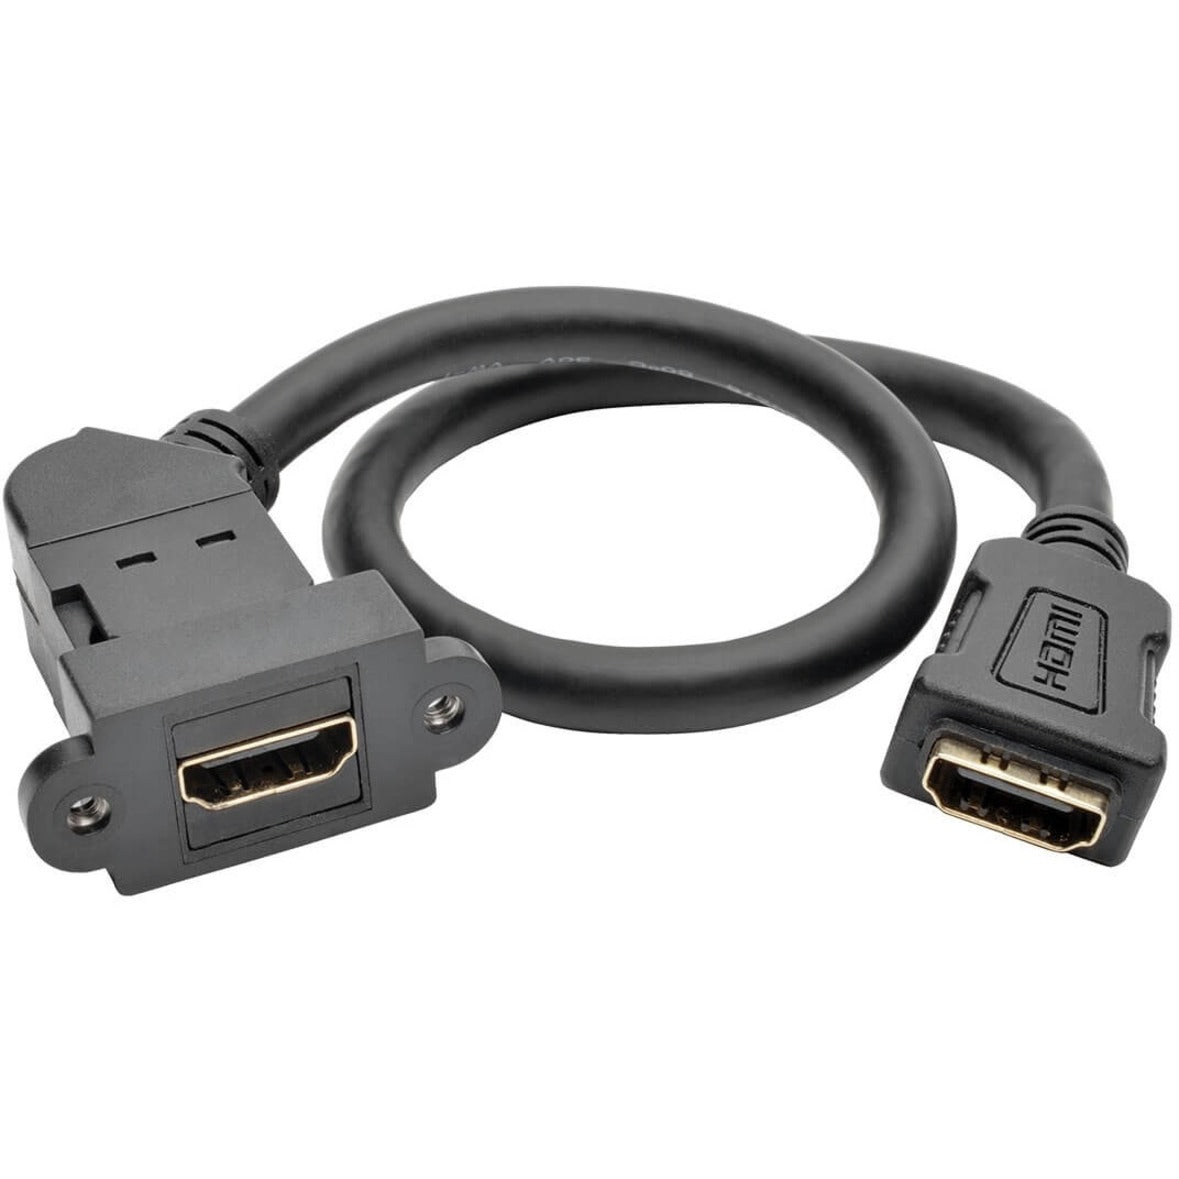 Tripp Lite P164-001-KPA-BK HDMI Audio/Video Cable, 1 ft, EMI/RF Protection, Gold Plated Connectors, Black